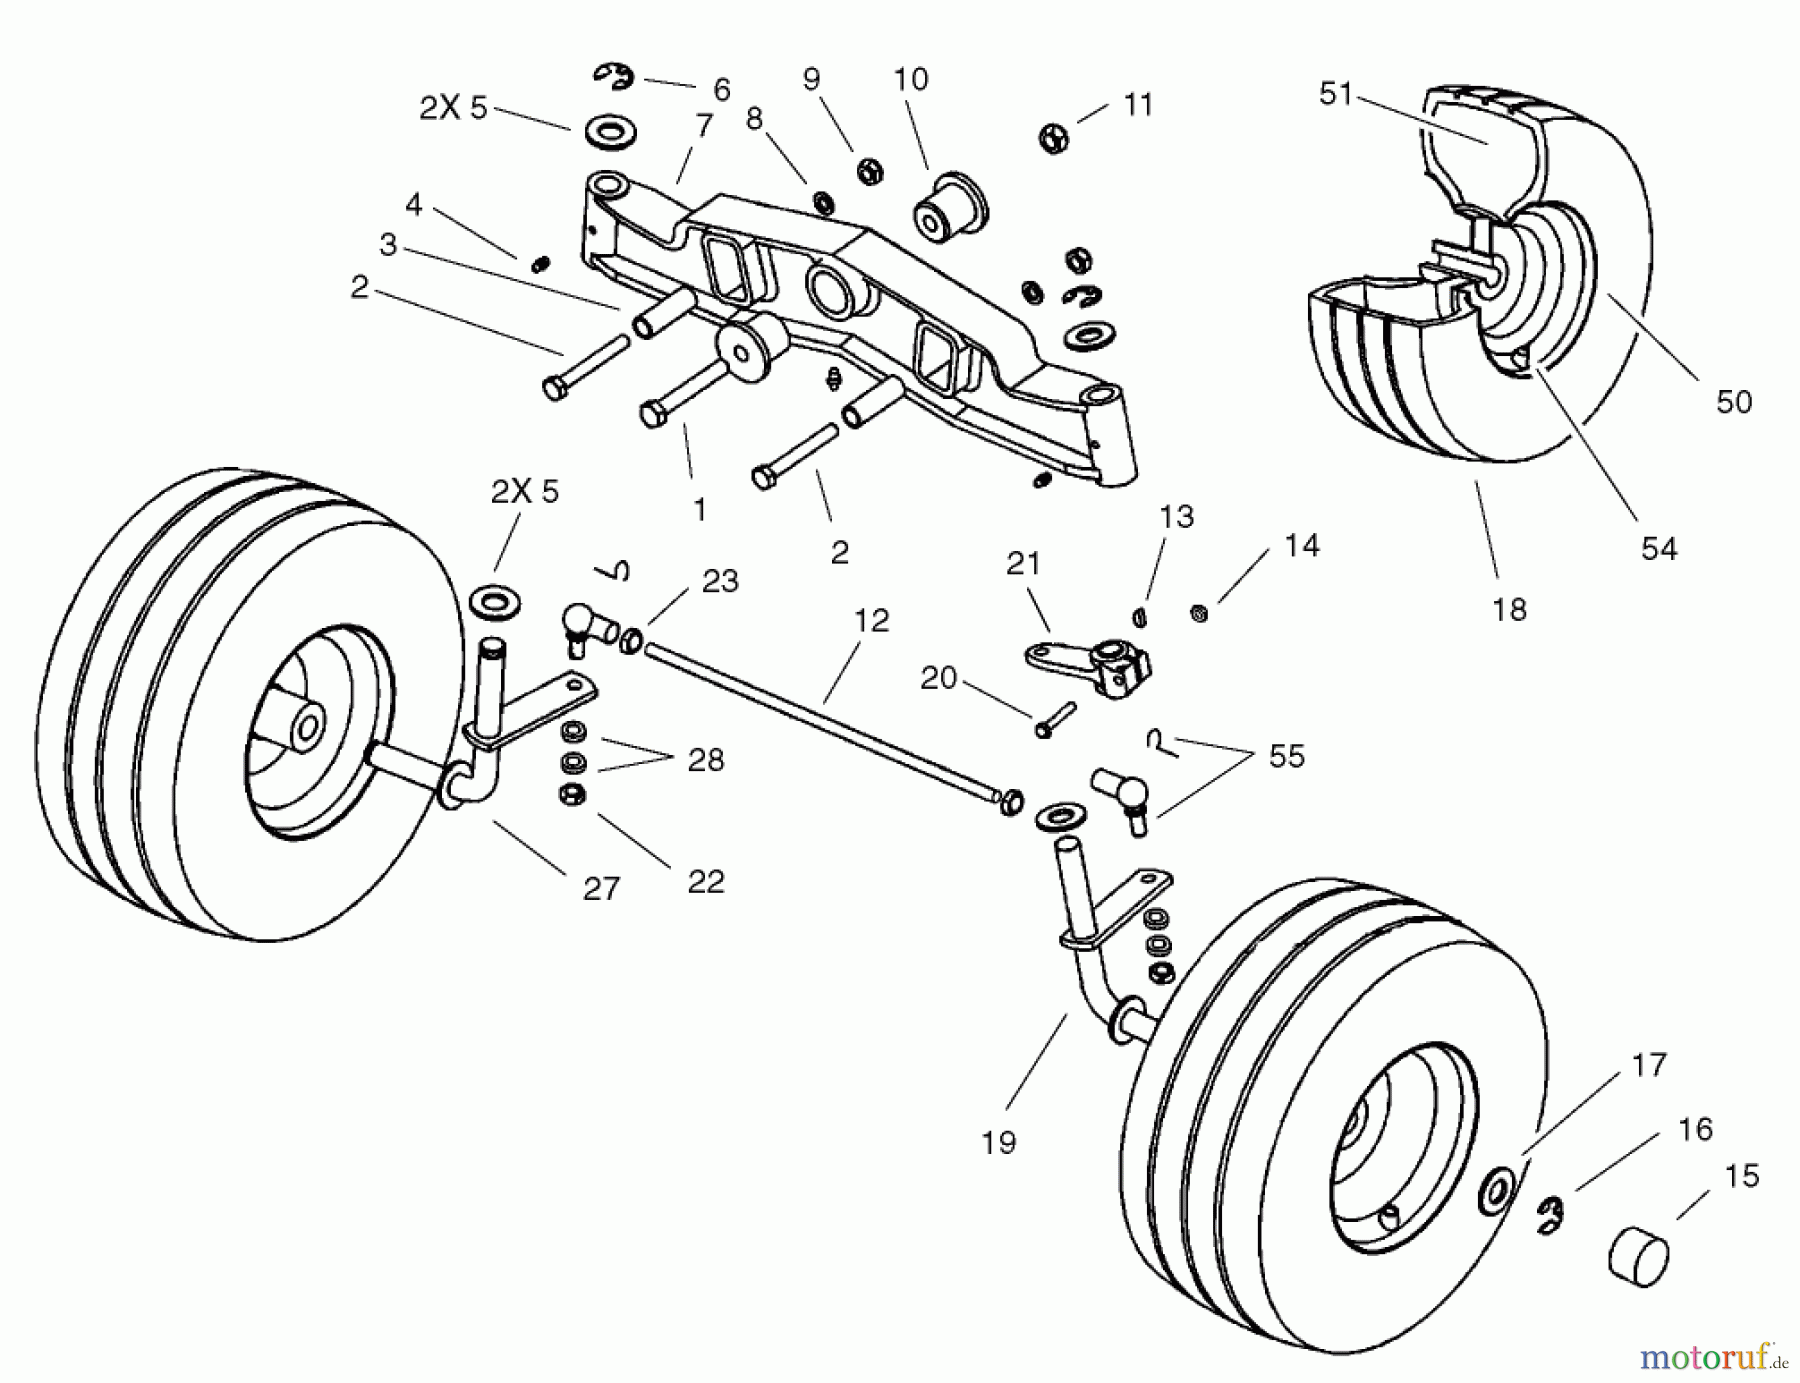  Toro Neu Mowers, Lawn & Garden Tractor Seite 1 74590 (190-DH) - Toro 190-DH Lawn Tractor, 2002 (220000001-220999999) FRONT AXLE ASSEMBLY